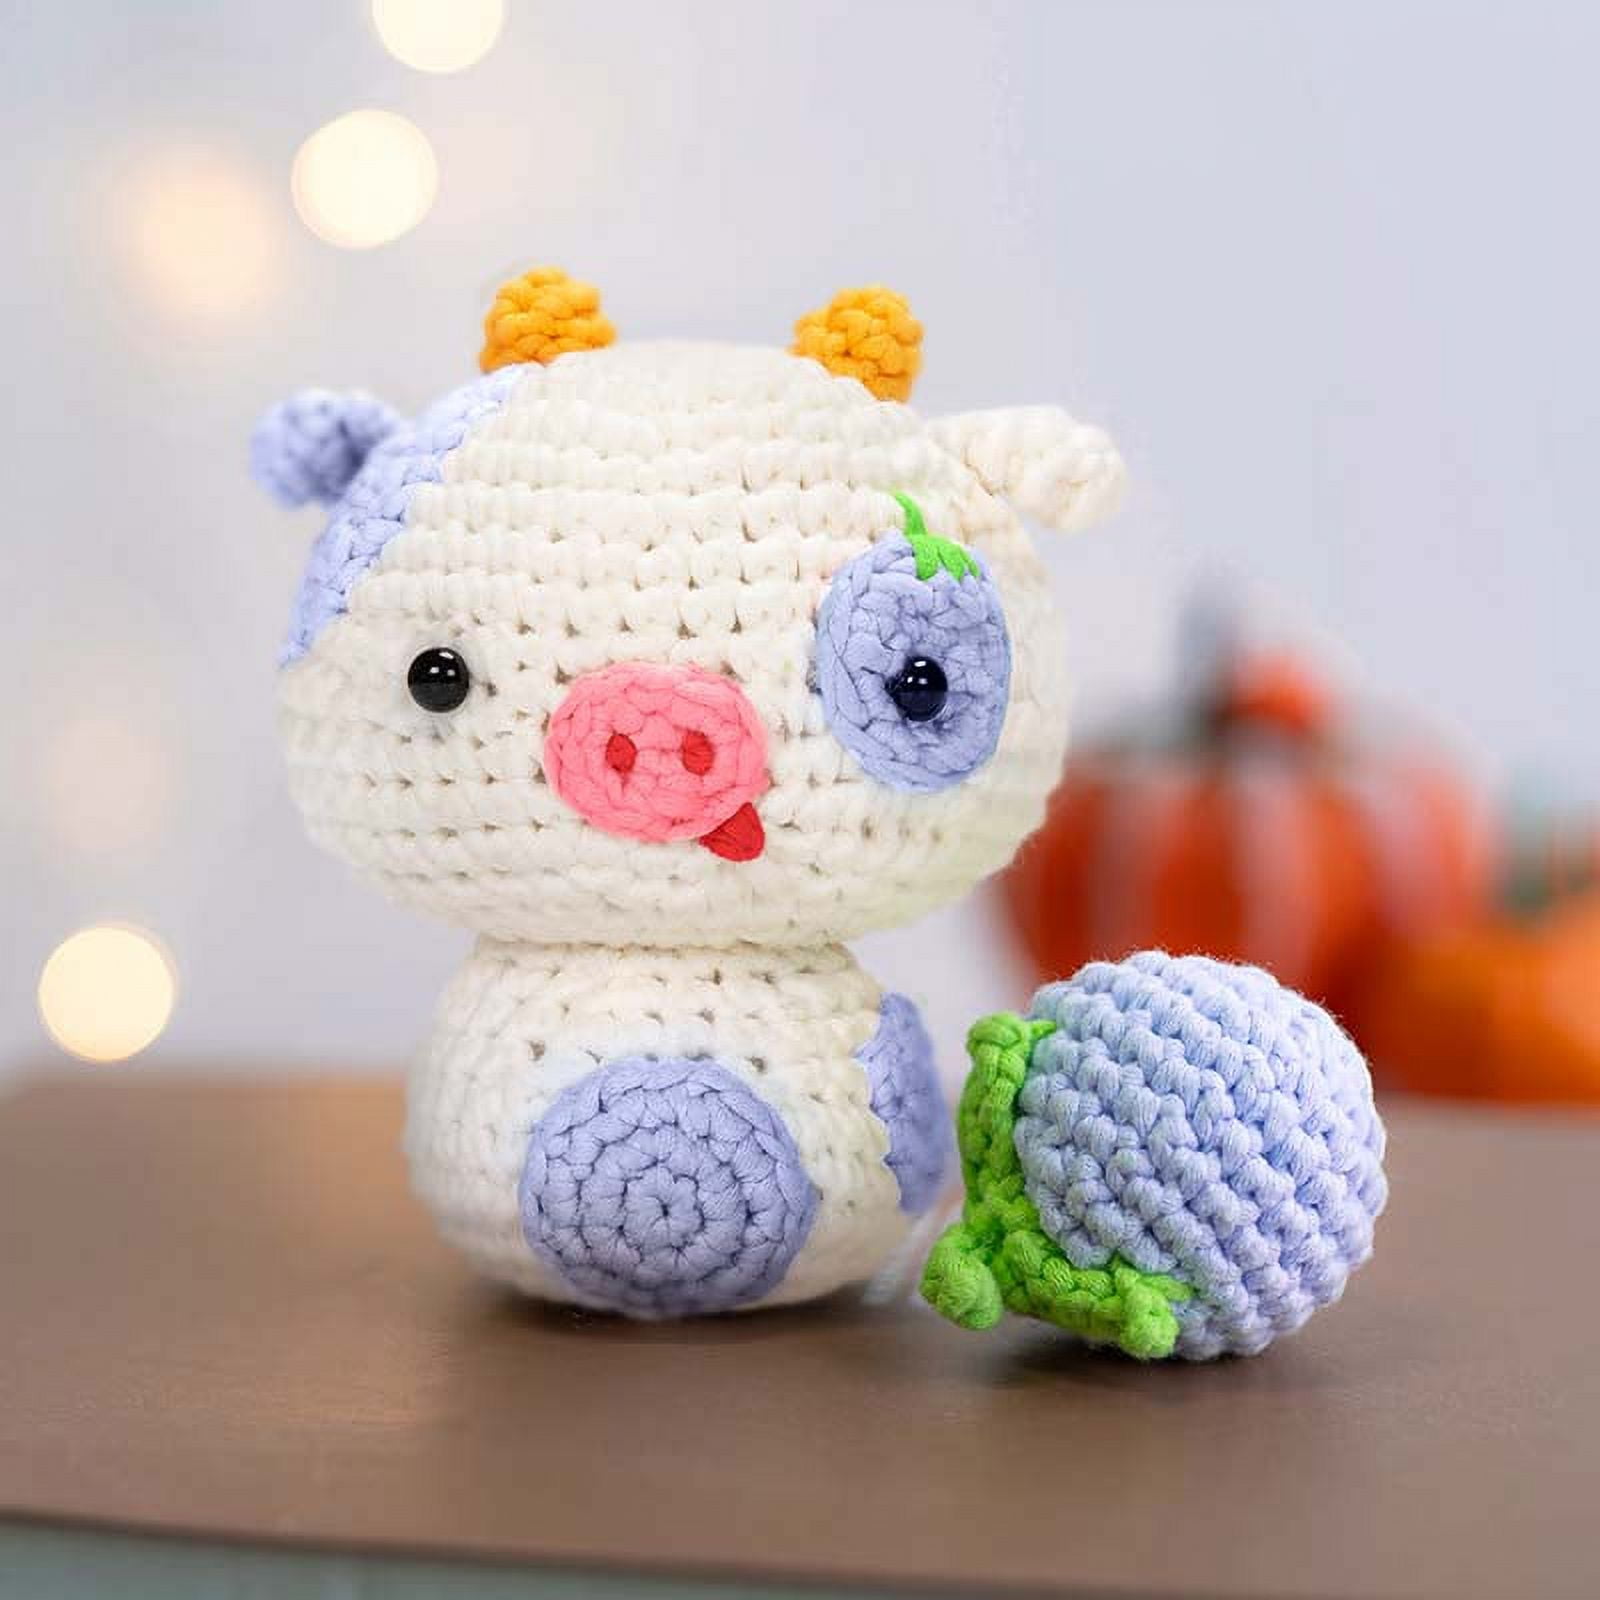  Mewaii Crochet Kit for Beginners, Complete DIY Kit Animals with  40%+ Pre-Started Tape Yarn Step-by-Step Video Tutorials for Adults Kids  (Strawberry Cow)